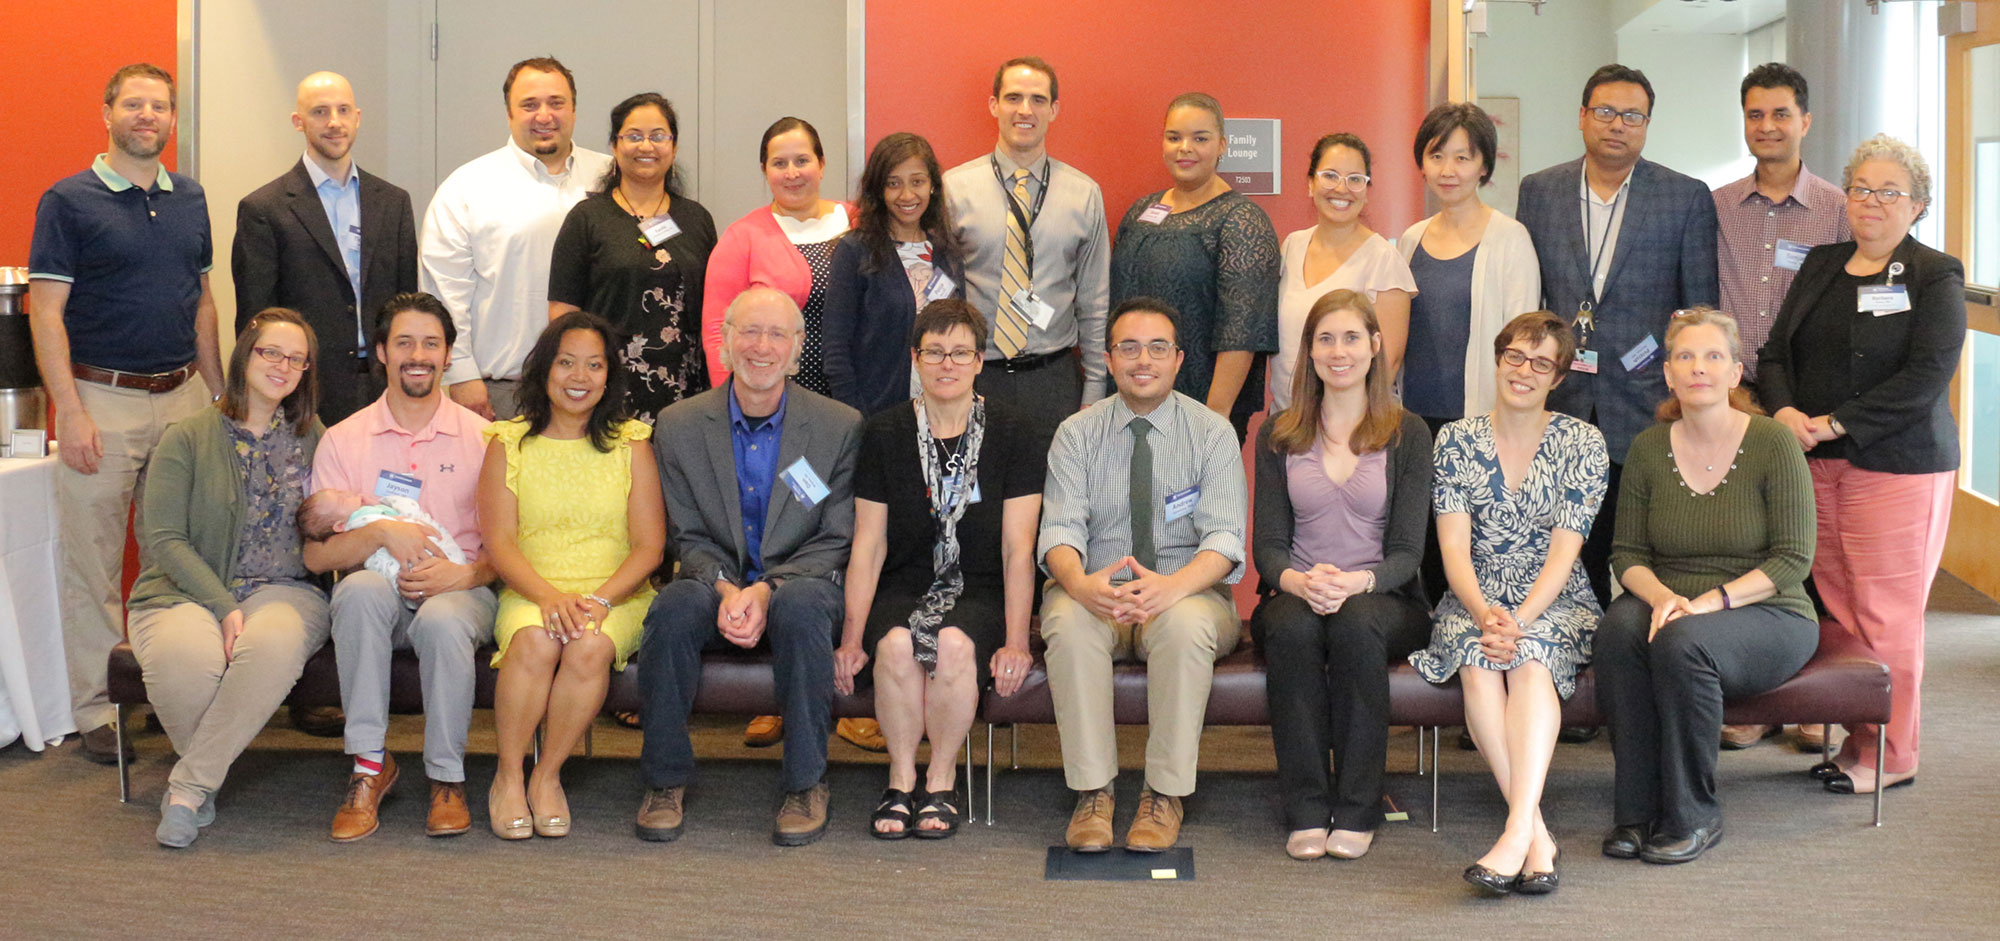 The 2017-2018 participants in Penn State College of Medicine's Junior Faculty Development Program are pictured with program leadership in May 2018. The faculty are pictured sitting and standing in two rows in a large meeting space.